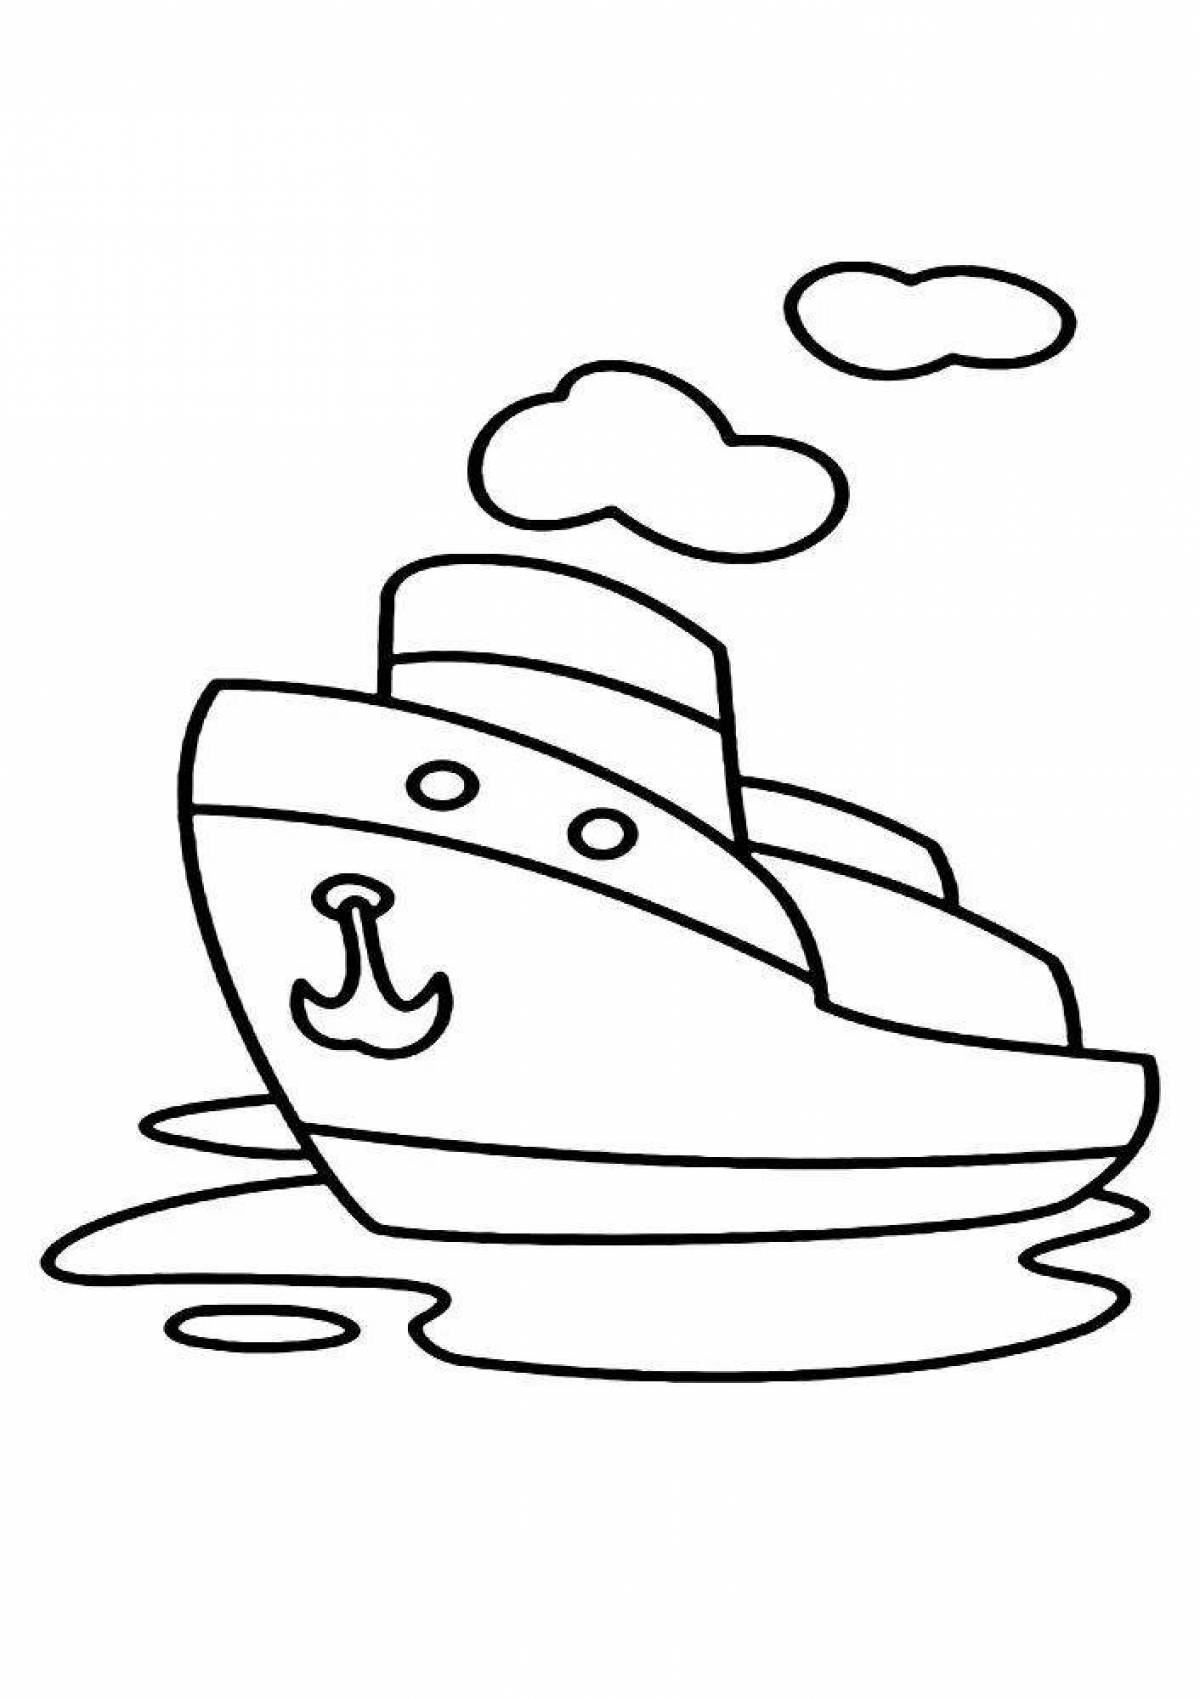 Sailboat coloring page for babies